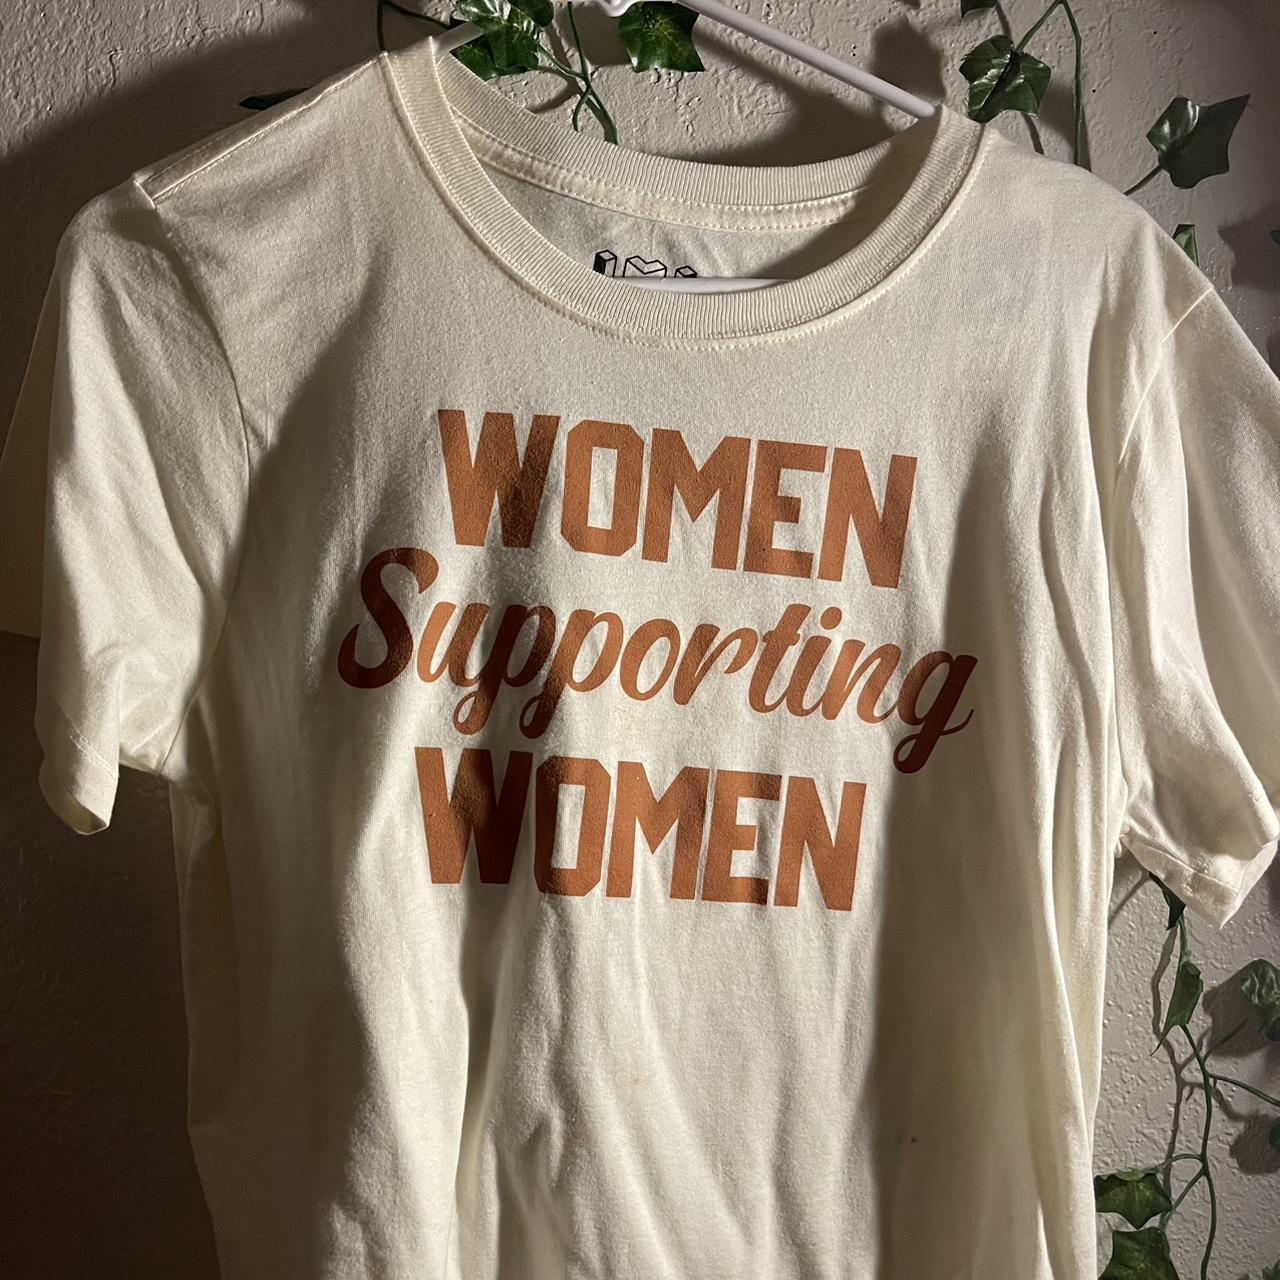 Women Supporting Women Tshirt Size S TINY stain... - Depop